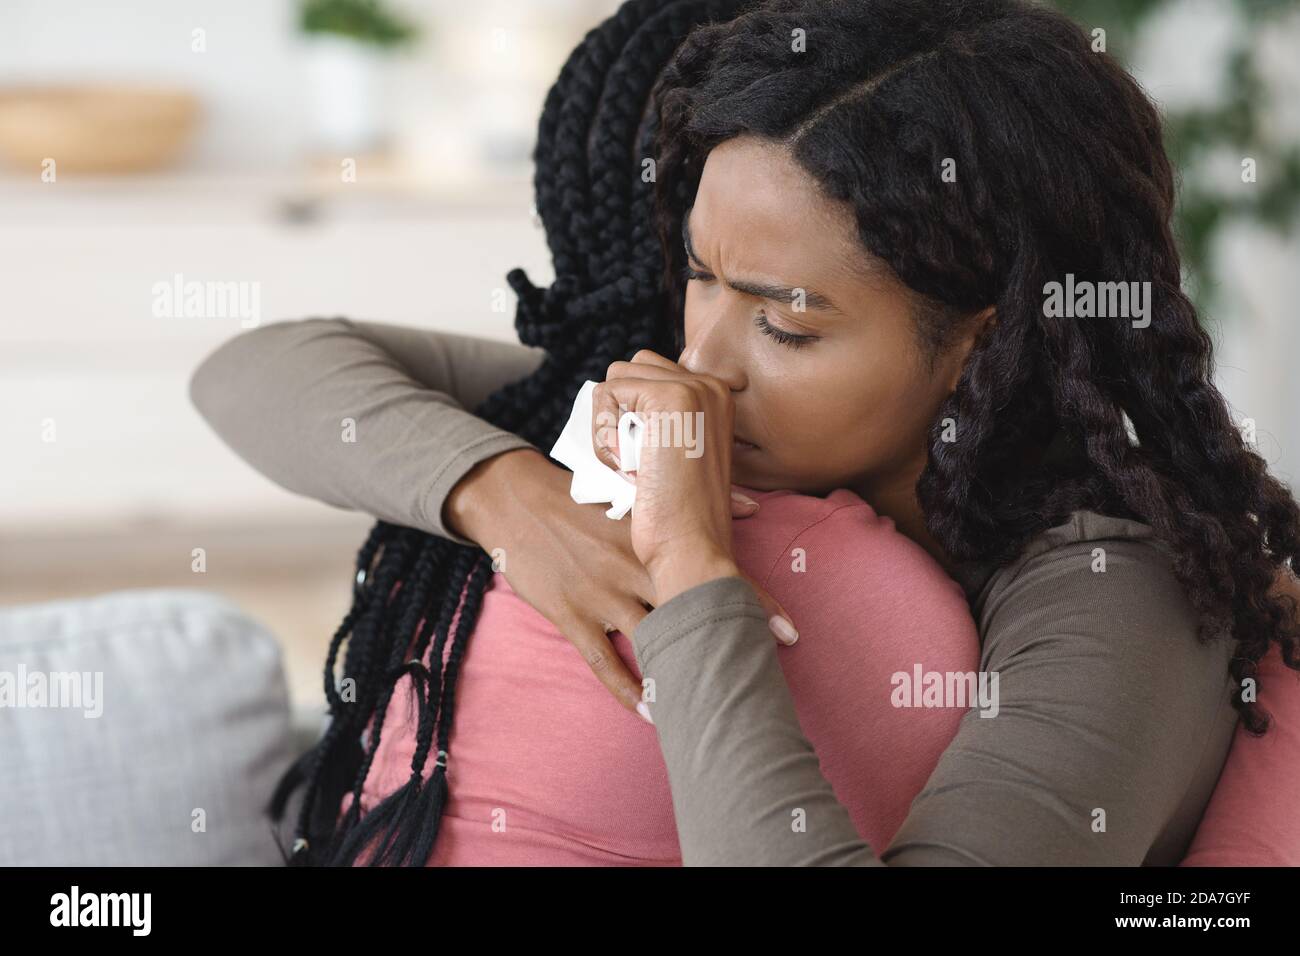 Crying black woman hugging her girlfriend or sister Stock Photo